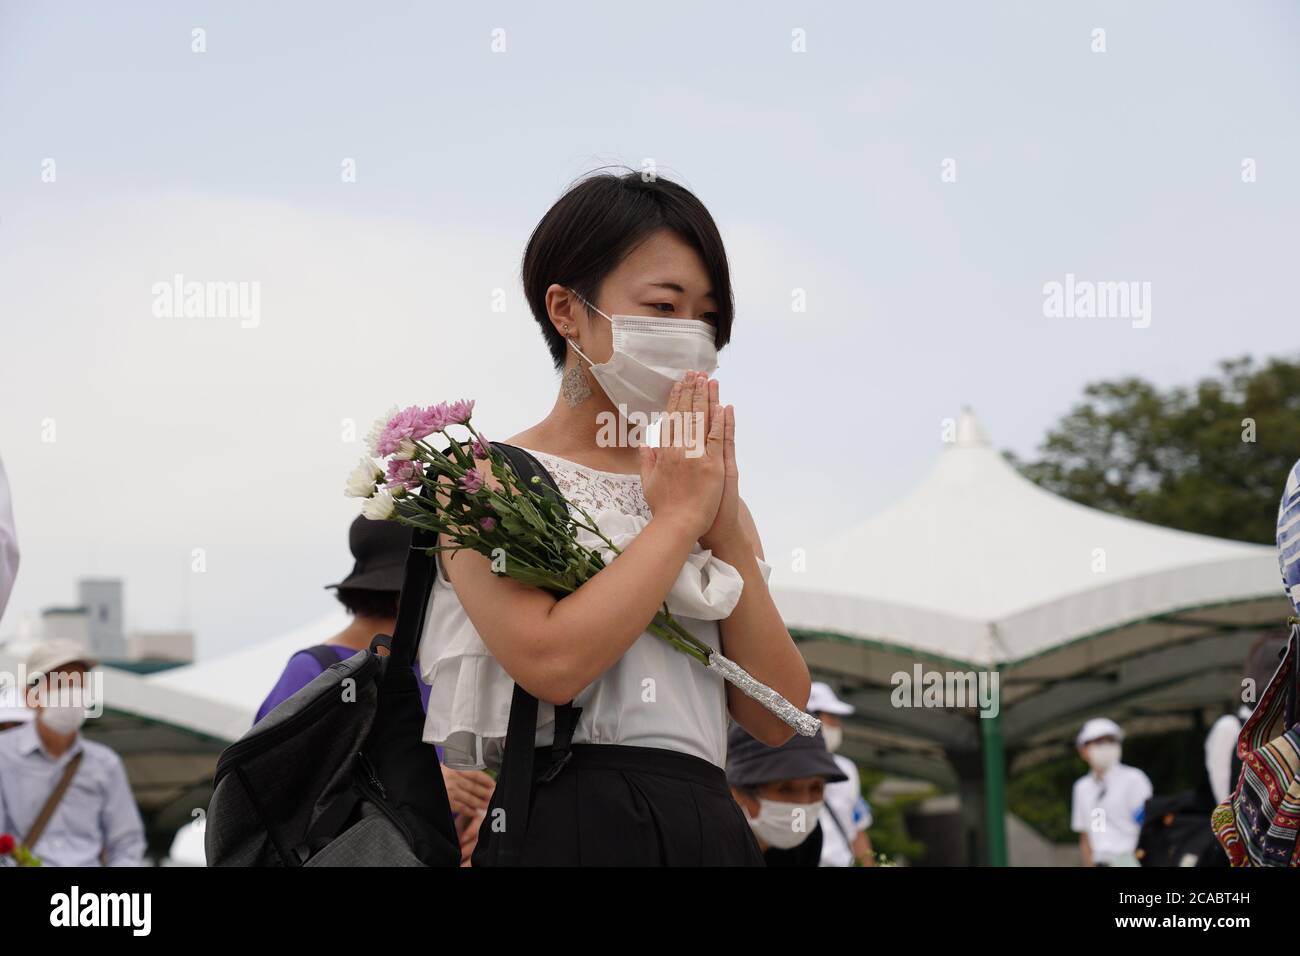 A woman prays while wearing a face mask at the Hiroshima Peace Memorial Ceremony.Hiroshima marks the 75th anniversary of the U.S. atomic bombing which killed about 150,000 people and destroyed the entire city during World War II. Stock Photo